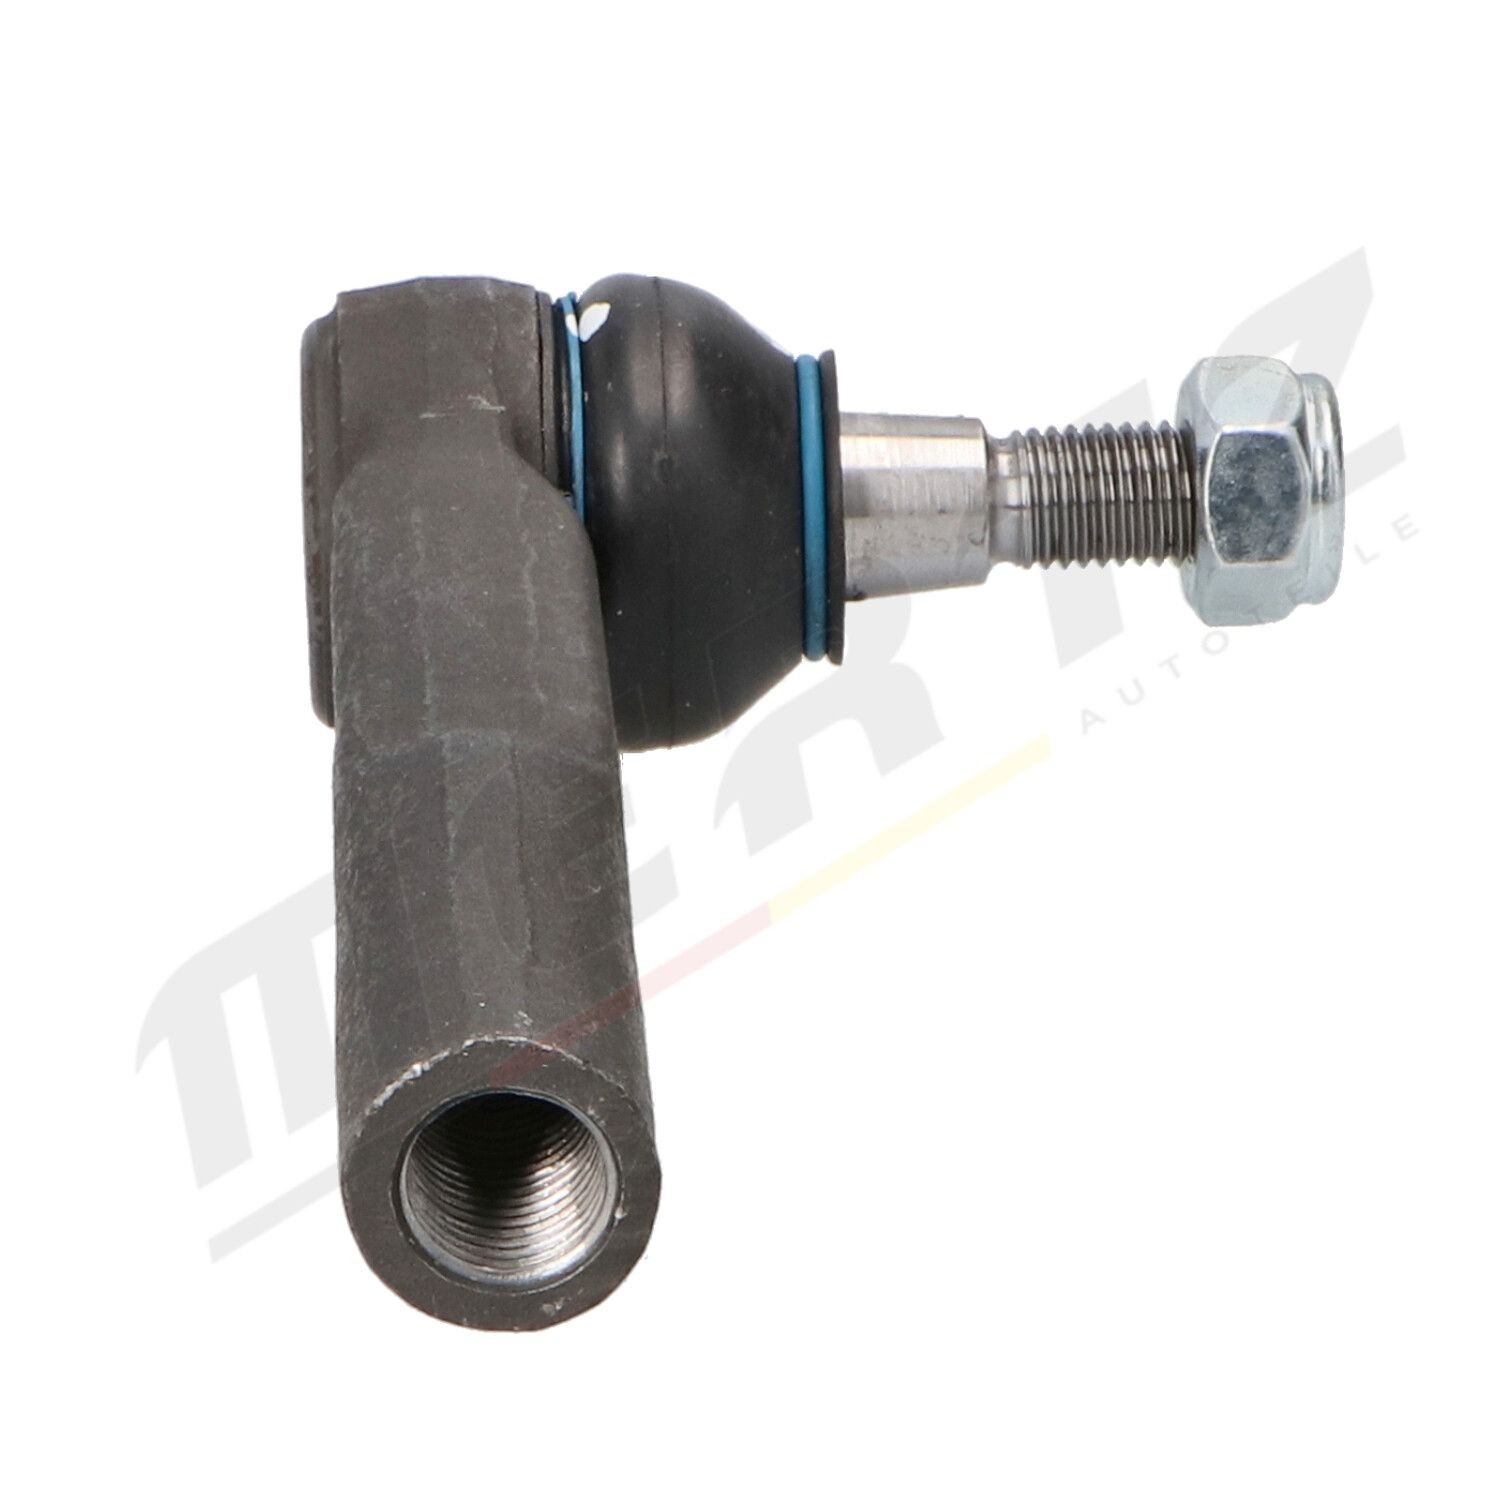 M-S0577 Tie rod end M-S0577 MERTZ Front Axle Right, with self-locking nut